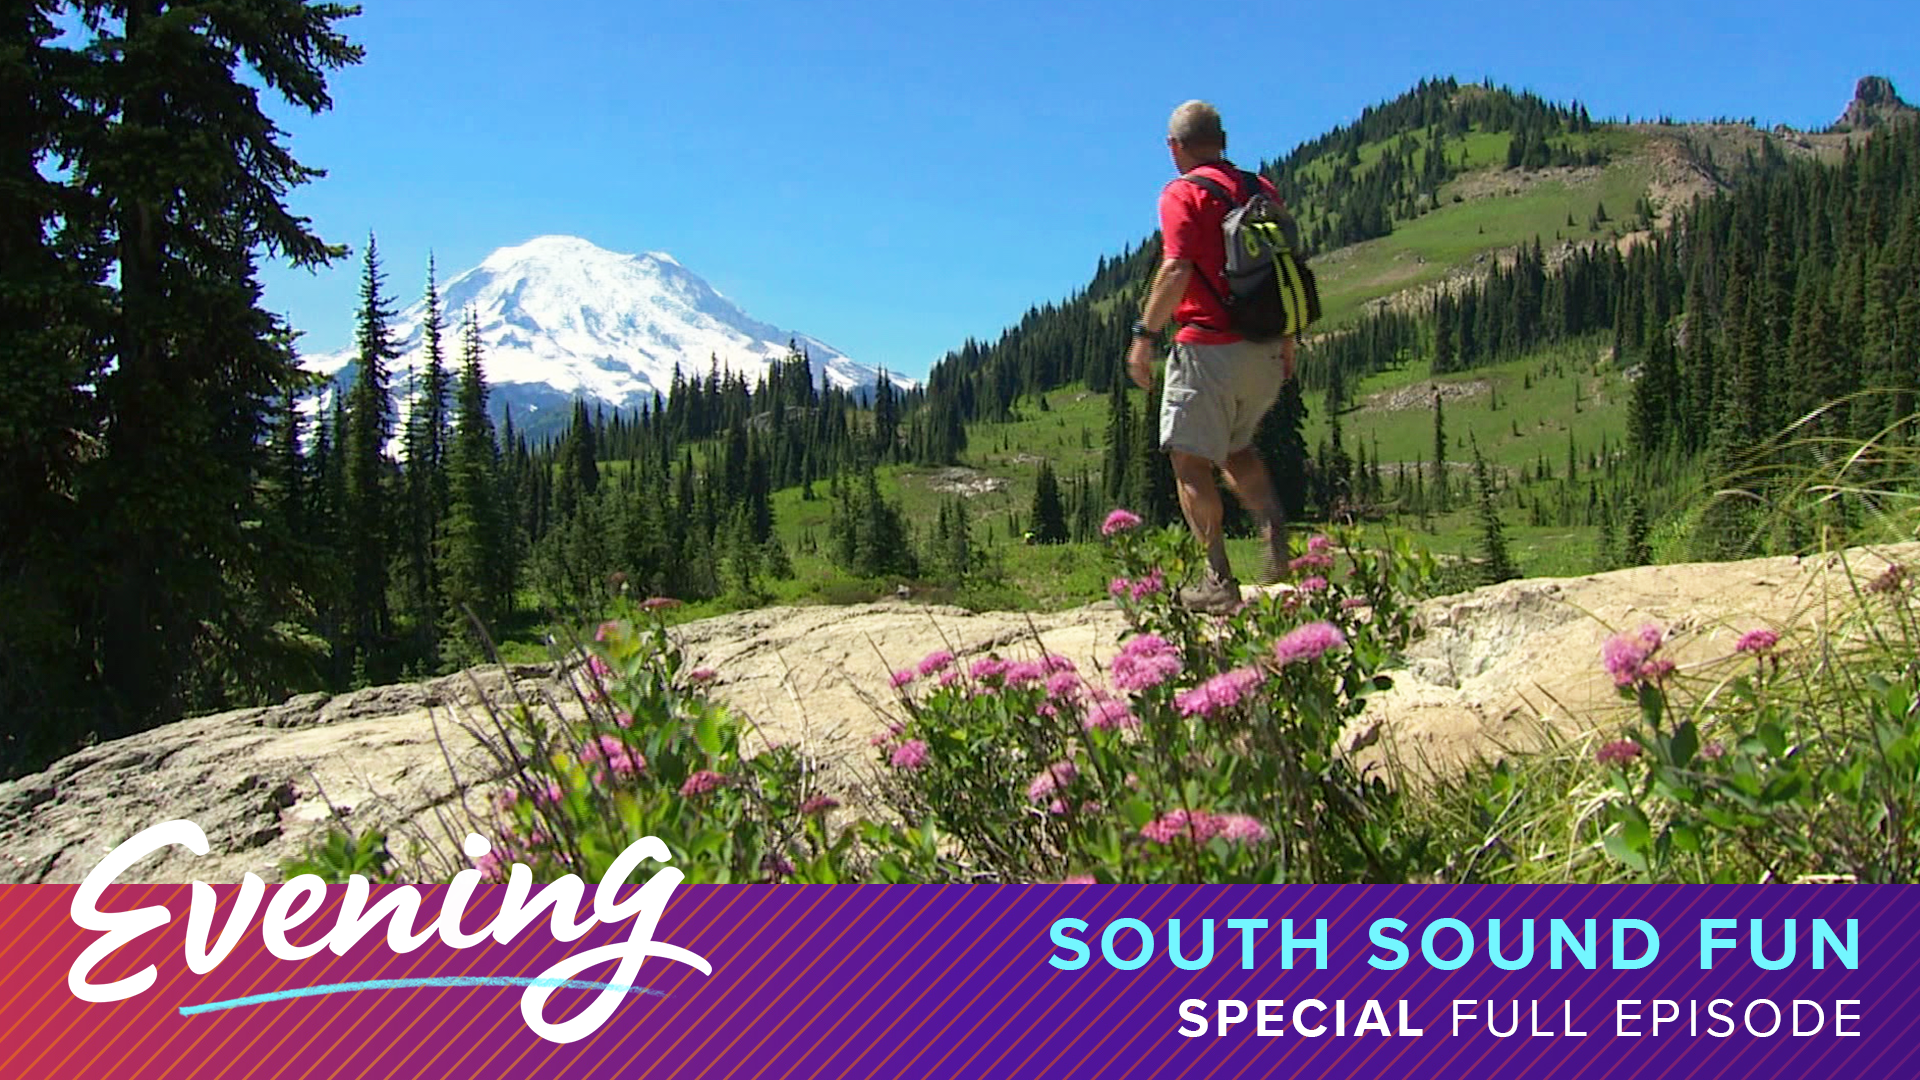 FEATURING: Mount Rainier, hiking trails, odd museums, activities for rail fans and more (Originally aired 8/23/2021).